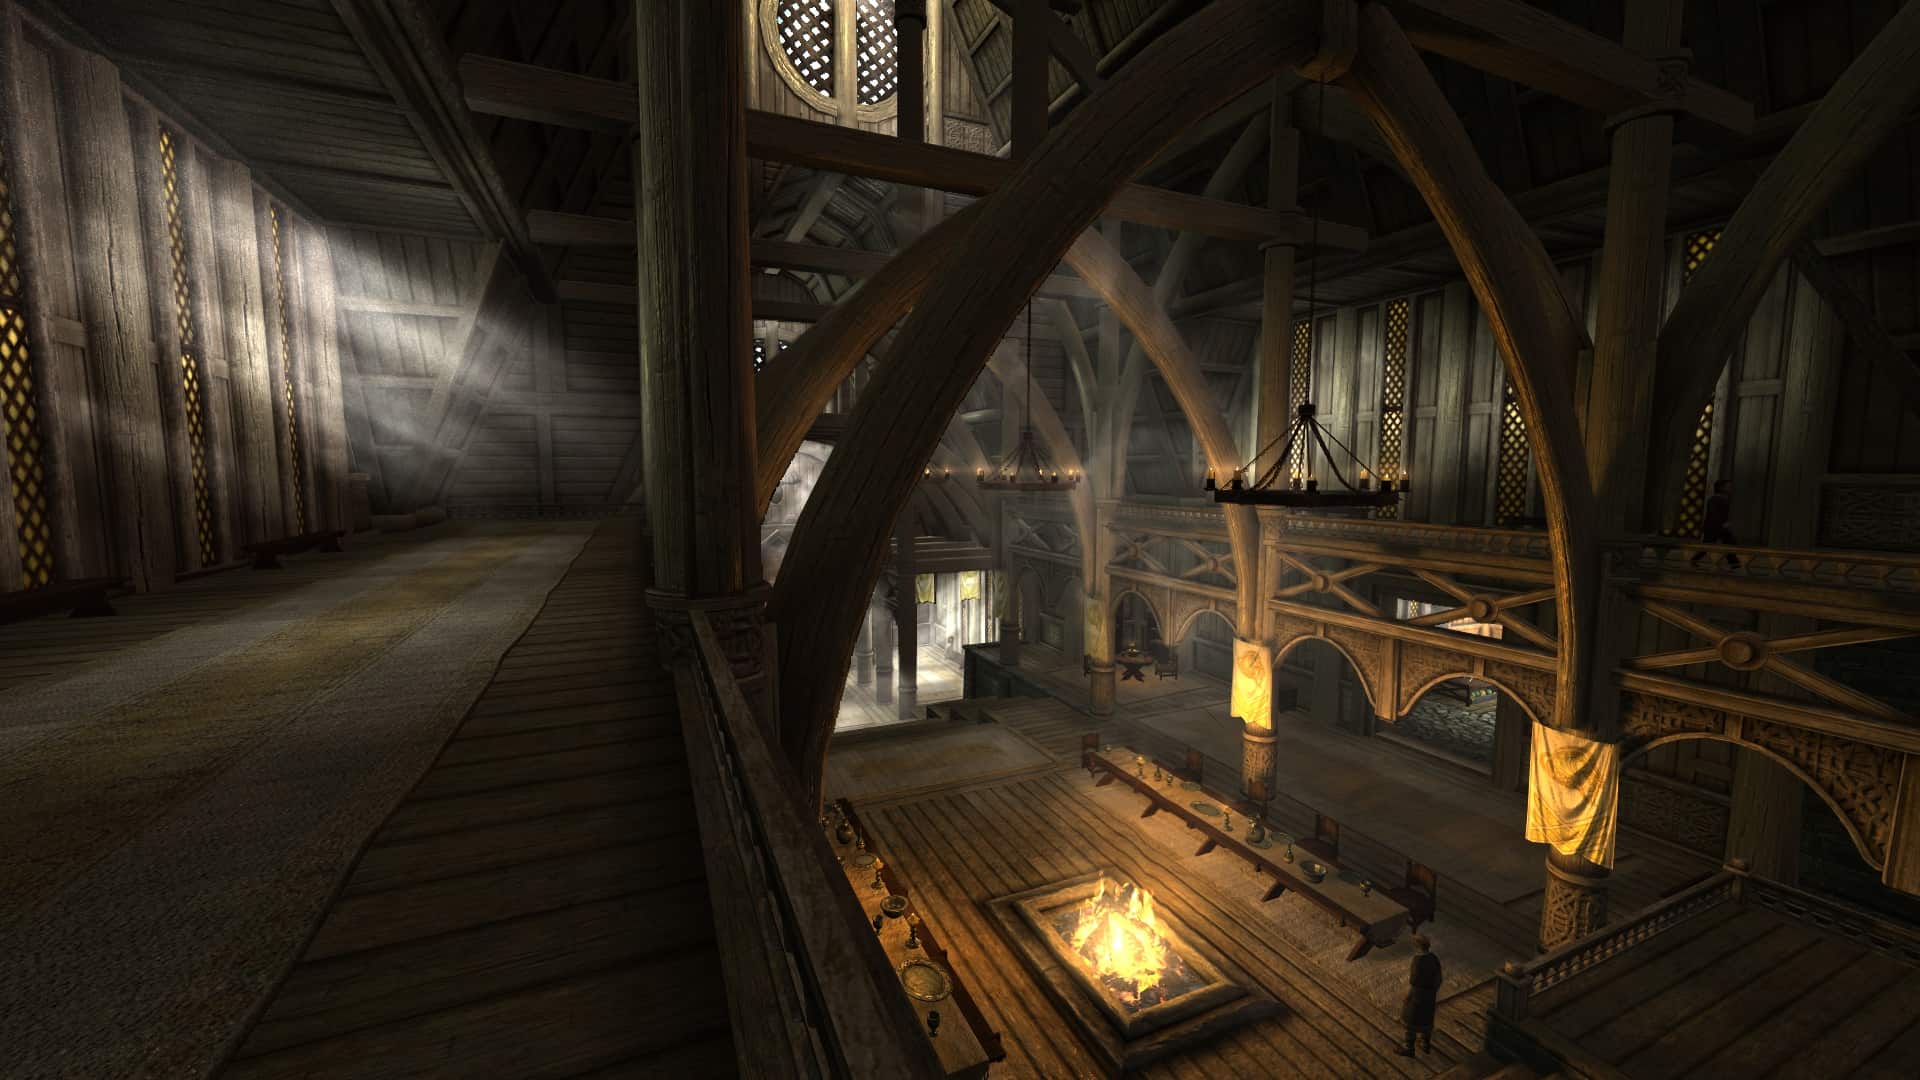 Skyrim: The 15 Coolest Player Home Mods We've Ever Seen